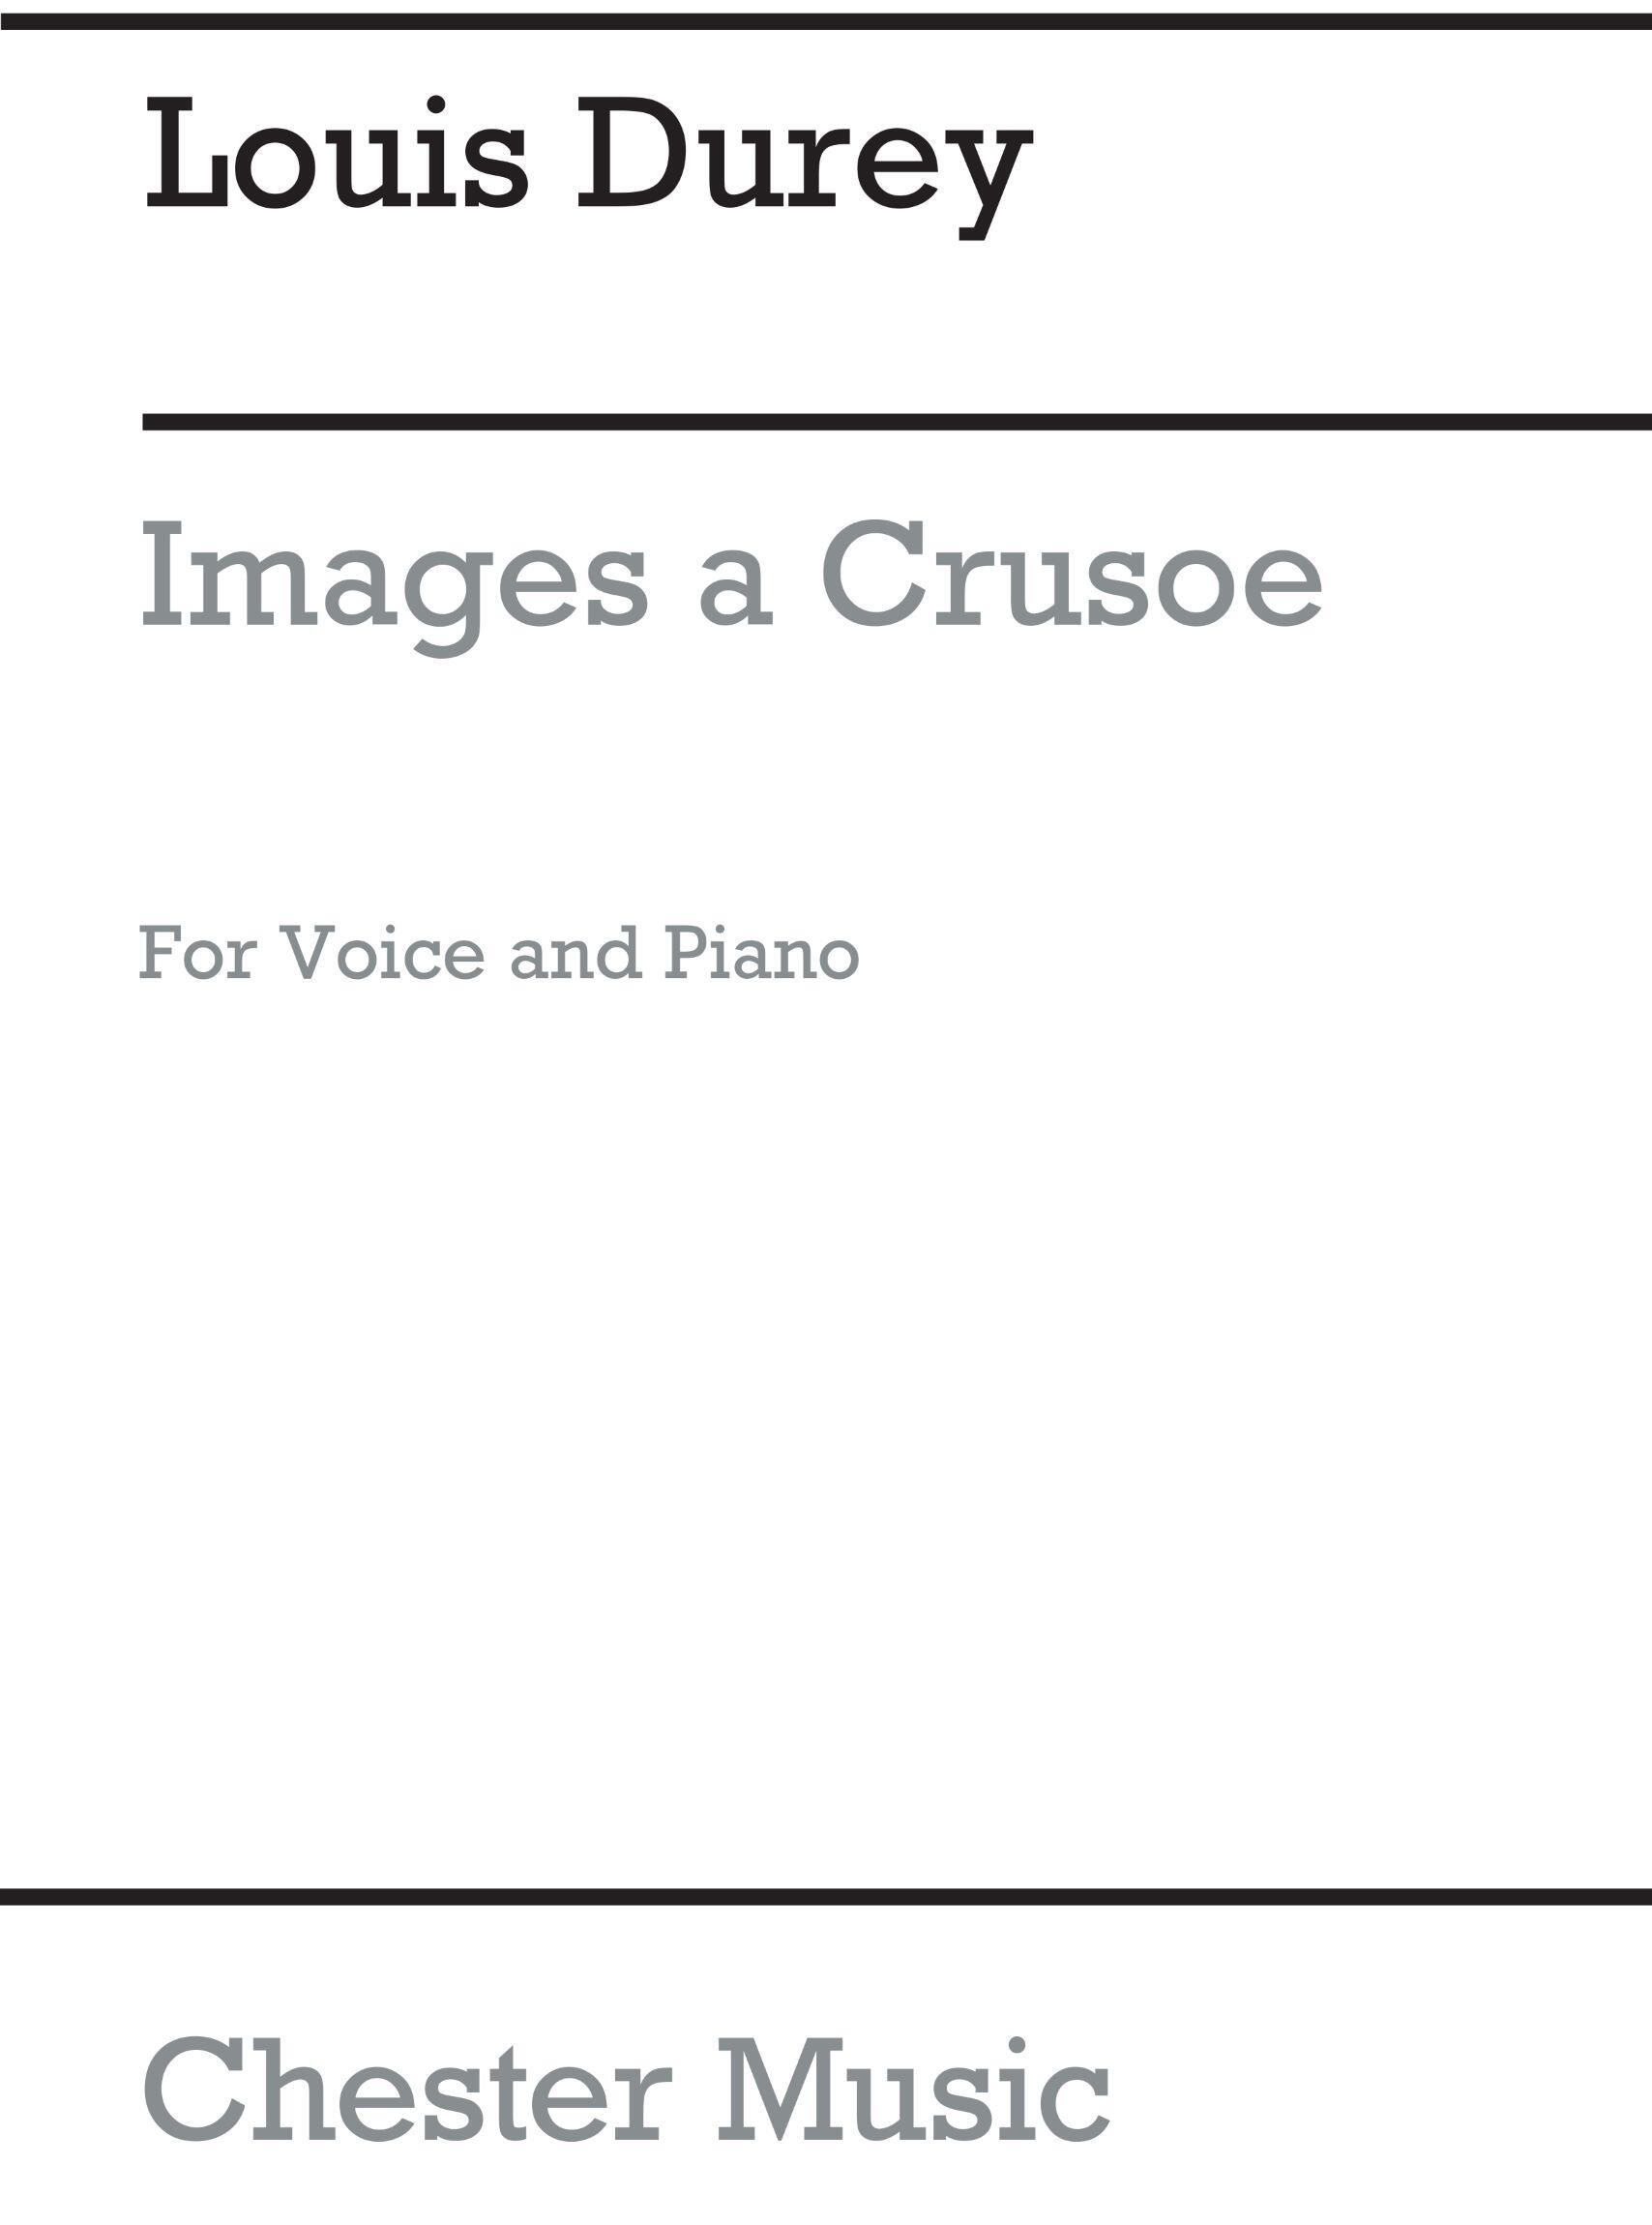 Images A Crusoe for Voice and Piano : photo 1